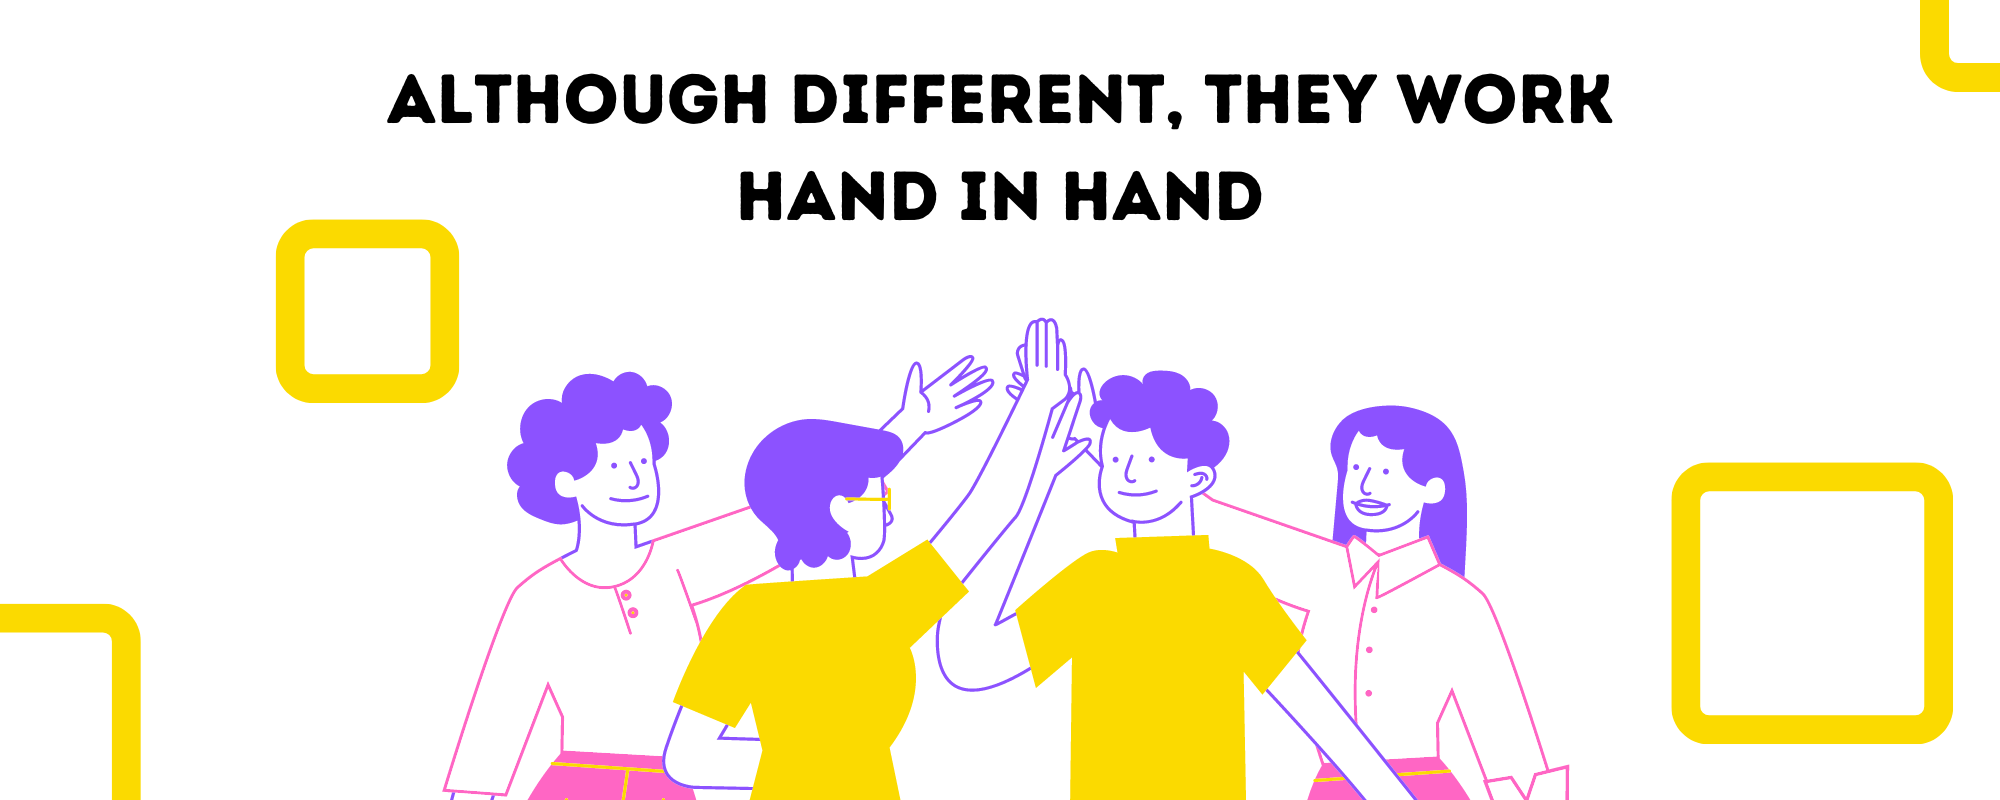 Four people giving each other high fives